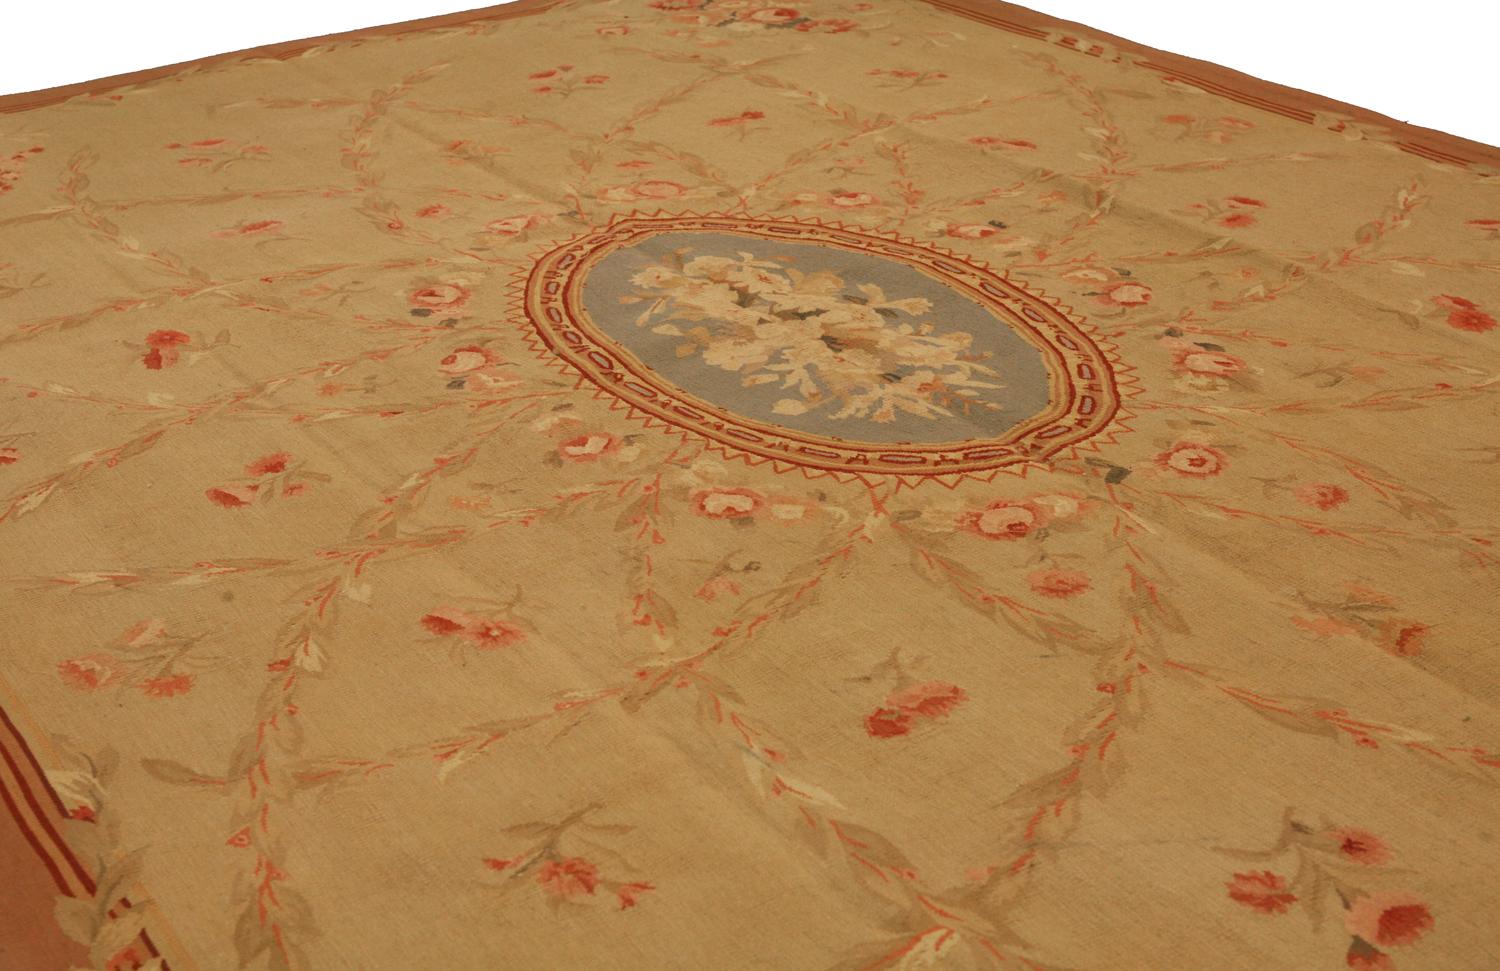 This Chinese Aubusson rug is perfect for adding a touch of elegance to any room. The intricate floral medallion design is sure to impress, while the soft, flat-weave construction makes it super comfortable to walk on. It measures 275 × 183 in CM.